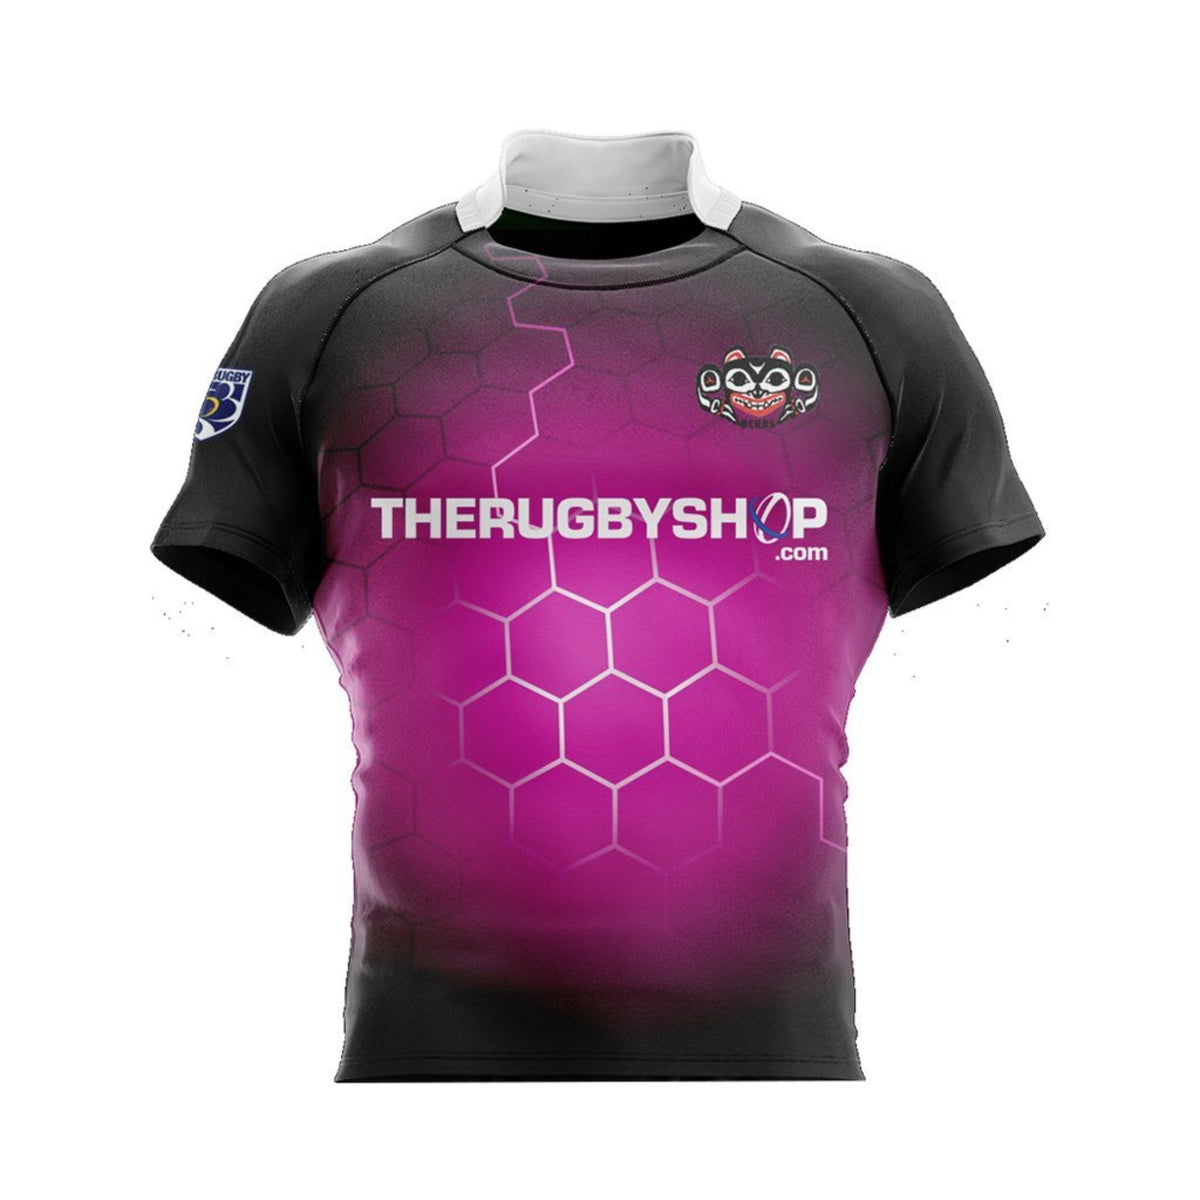 BCRRS Unisex Ref Jersey- Electric Pink - www.therugbyshop.com www.therugbyshop.com ADULT UNISEX / ELECTRIC PINK / XS KONNO JERSEYS BCRRS Unisex Ref Jersey- Electric Pink